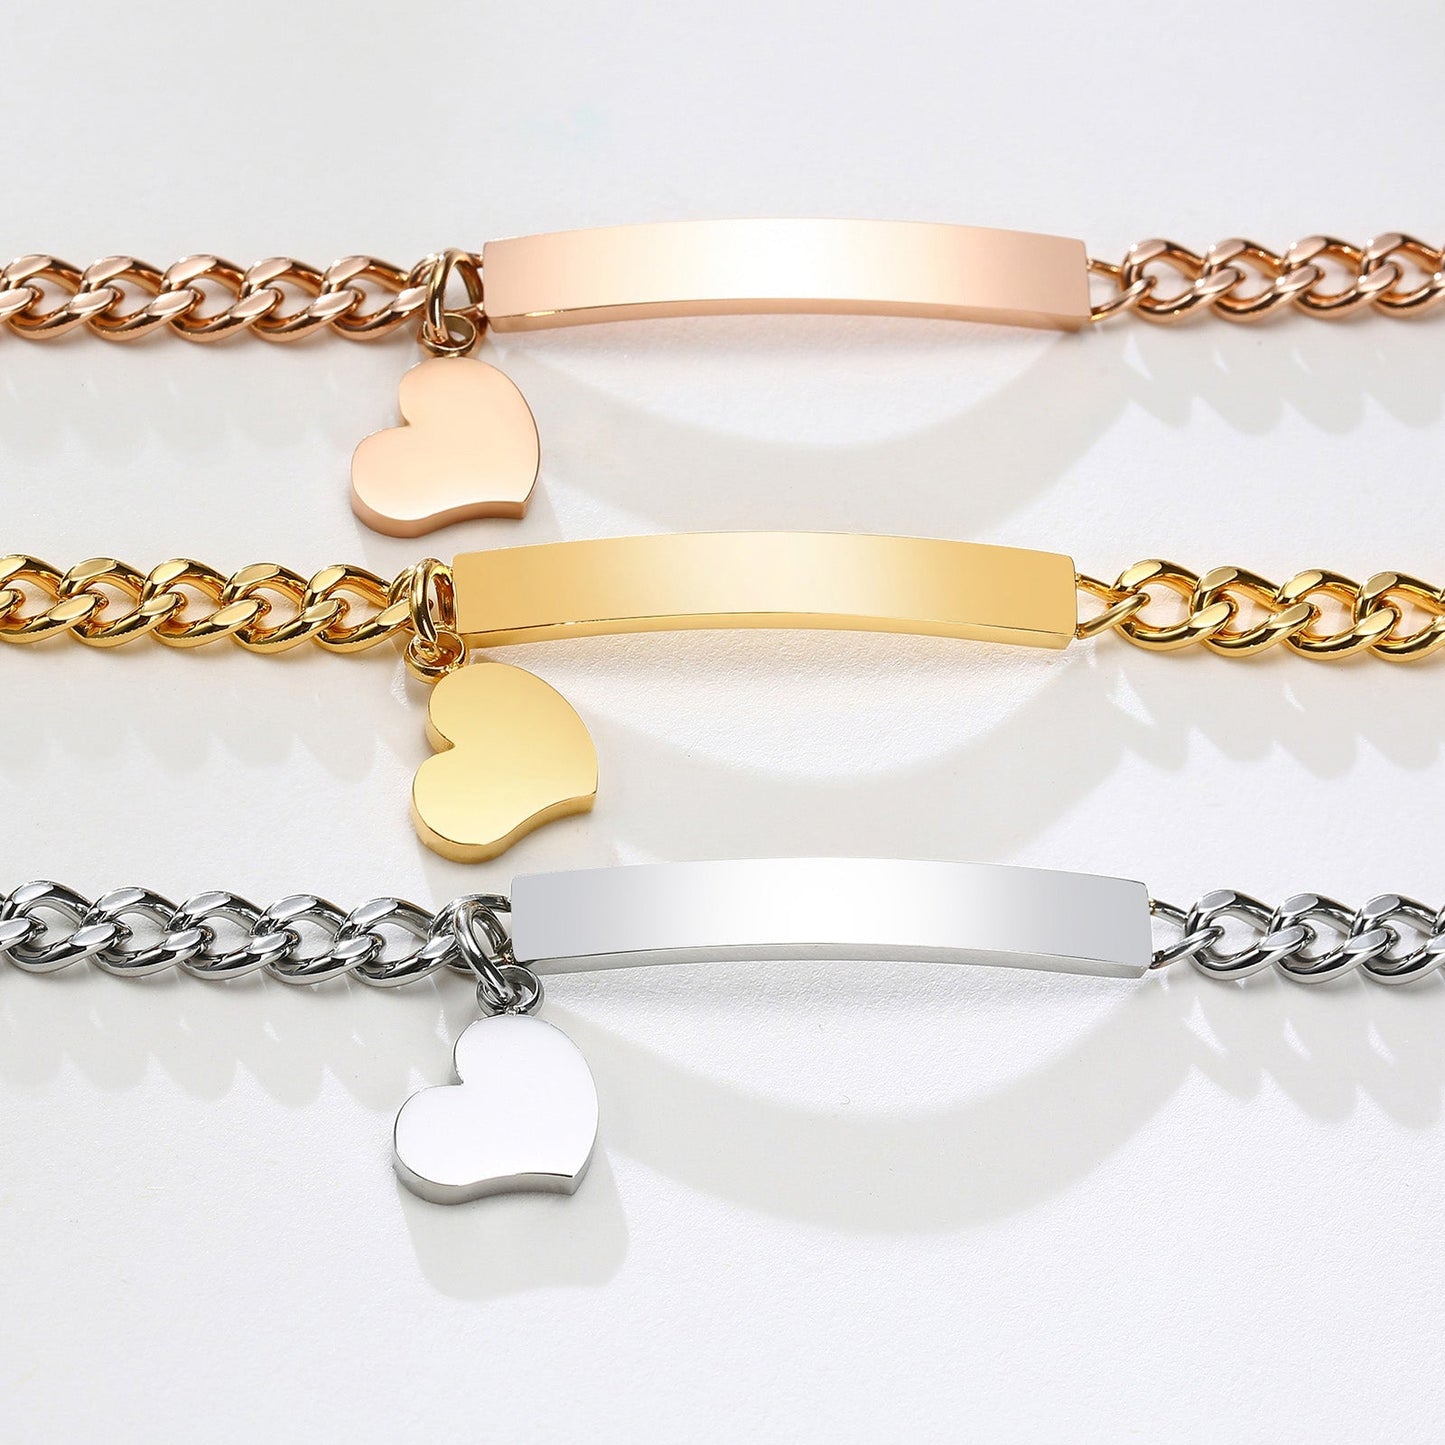 Baby and Children's Bracelets:  Steel with Gold IP Engravable Bracelets with Heart Charm Age 3 Months to 5 Years